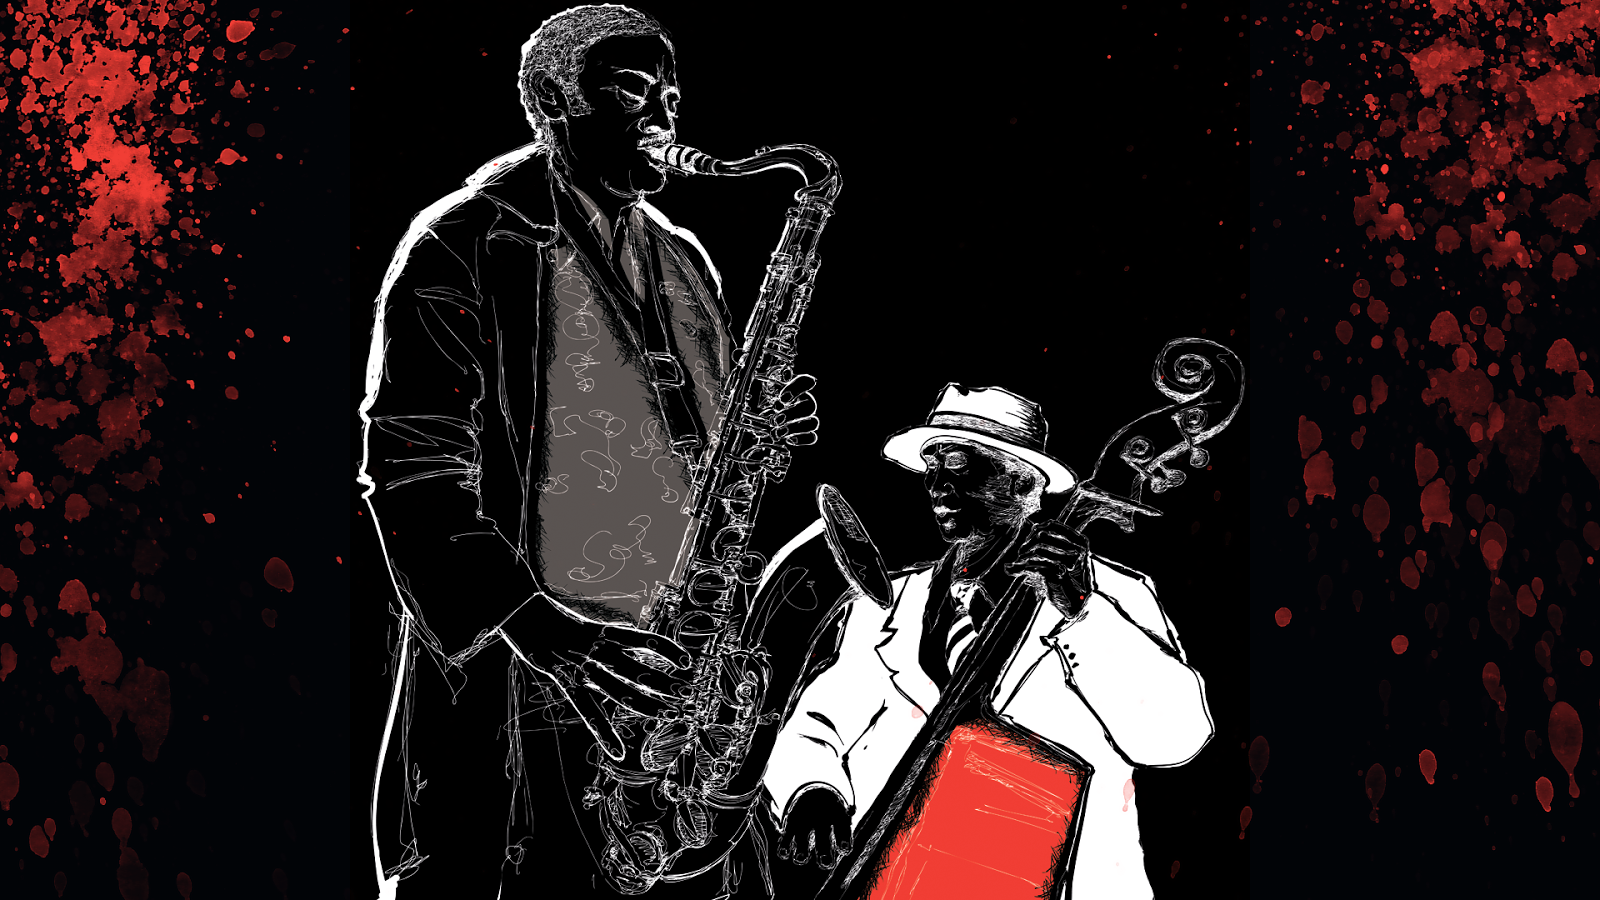 Bass And Sax Jazz Wallpaper How Fast Food Corporations Degrade